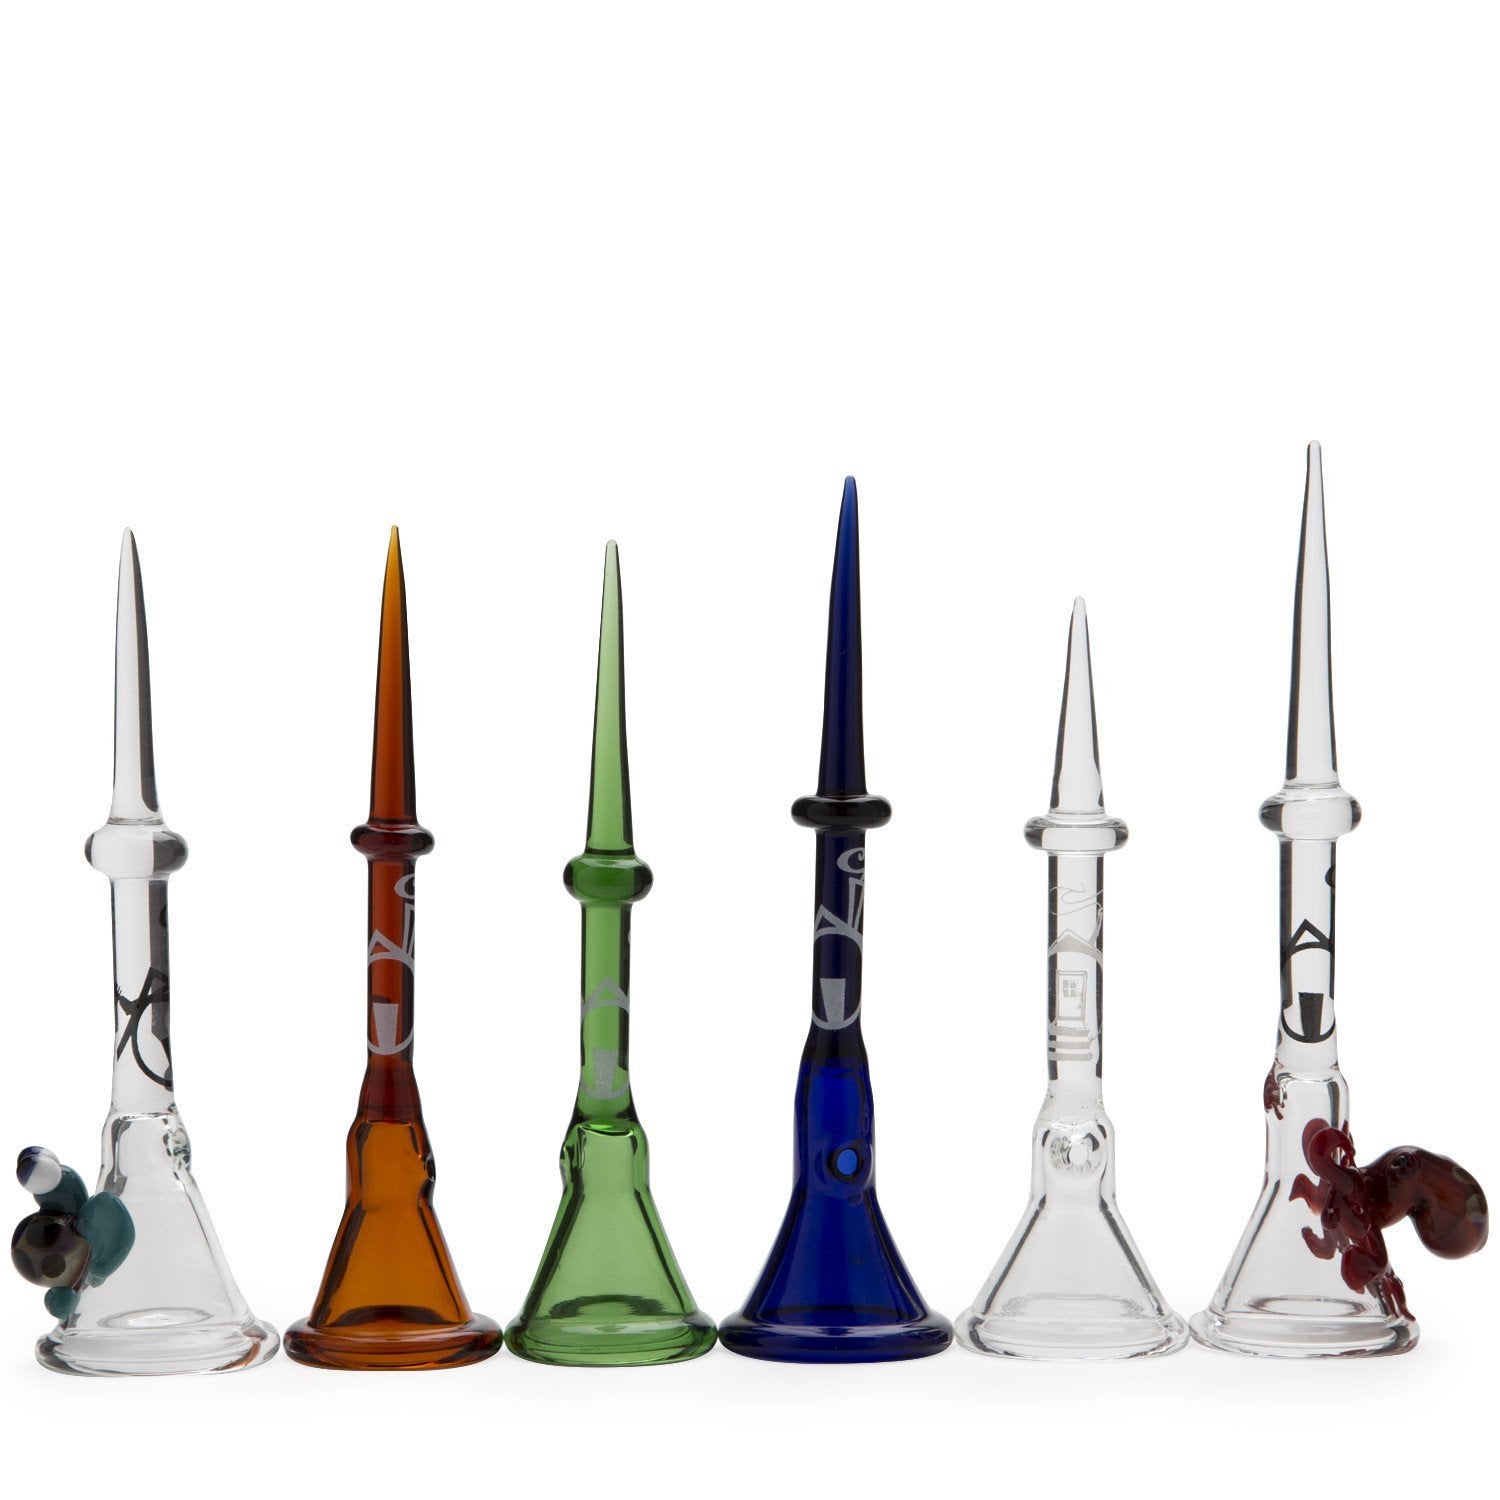 Home Blown Glass Carb Cap Dabber - Green - 420 Science - The most trusted online smoke shop.